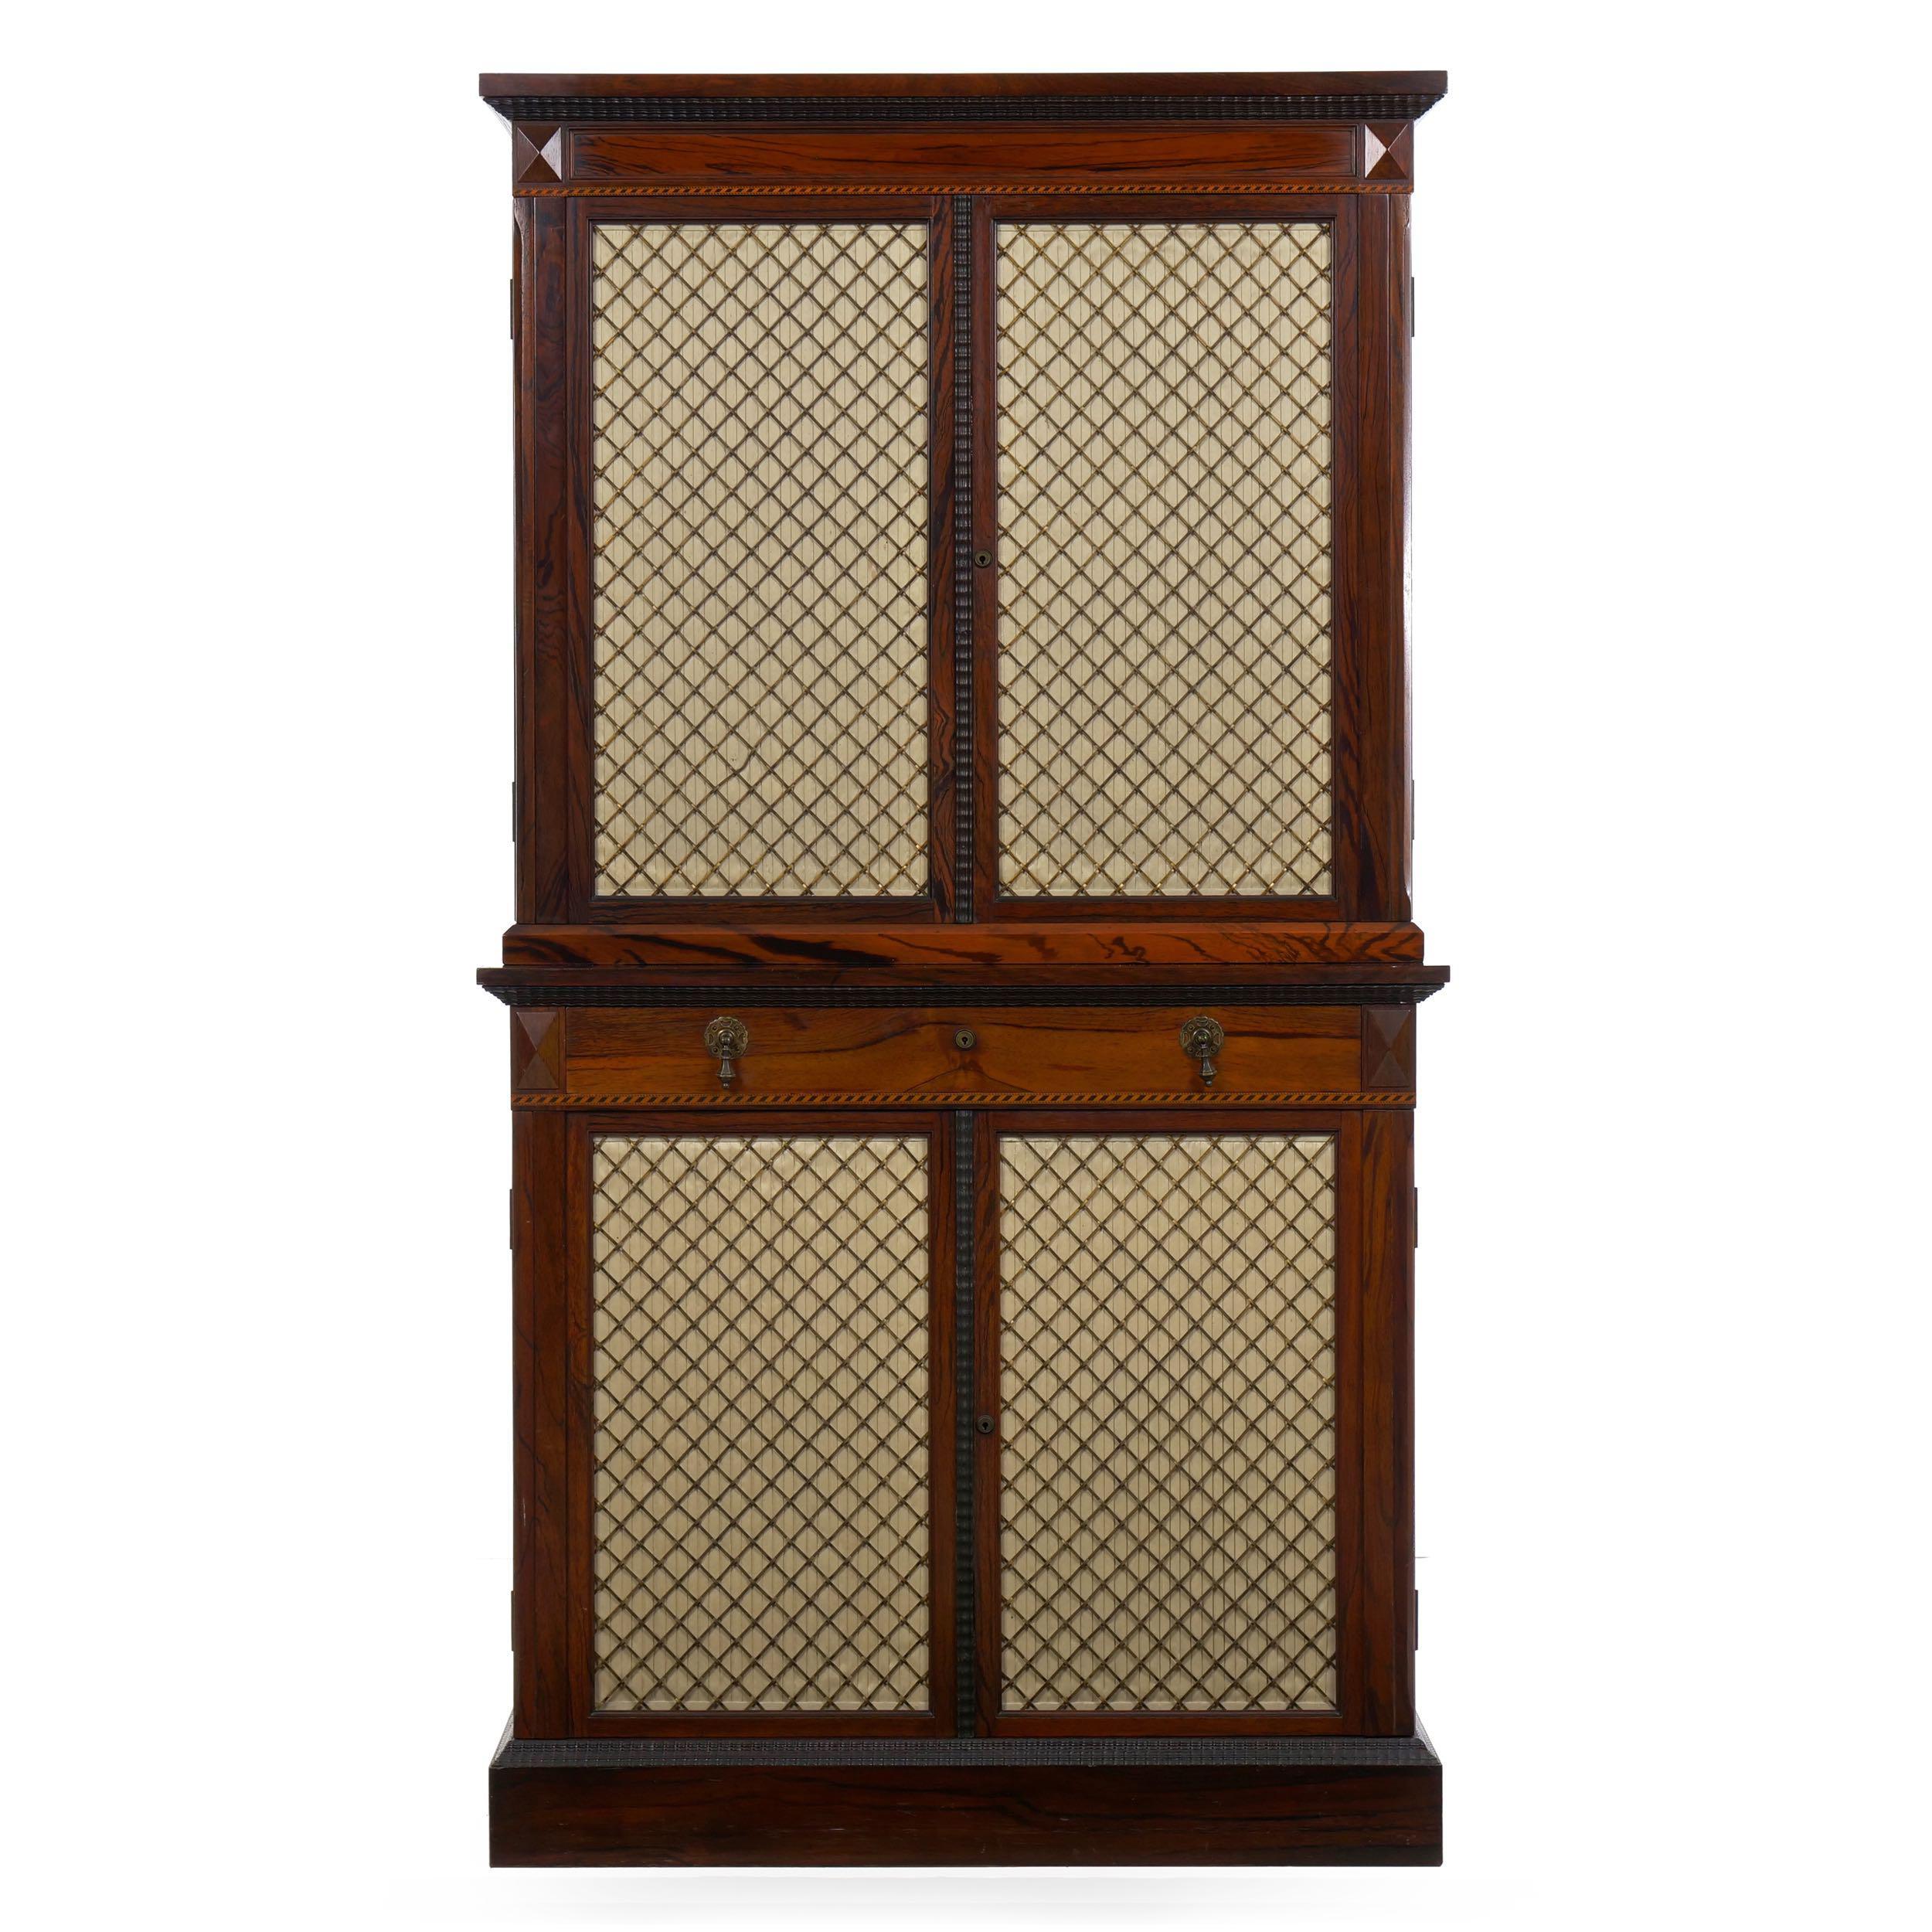 VERY FINE ROSEWOOD HUMIDOR CABINET BY MELLIER & CO
London, circa 1880; Mellier & Co plaque verso, locks by J. Bramah
Item # 906SBP05A 

An exceptional rosewood standing humidor cabinet in two parts, it is of the highest quality and beautifully